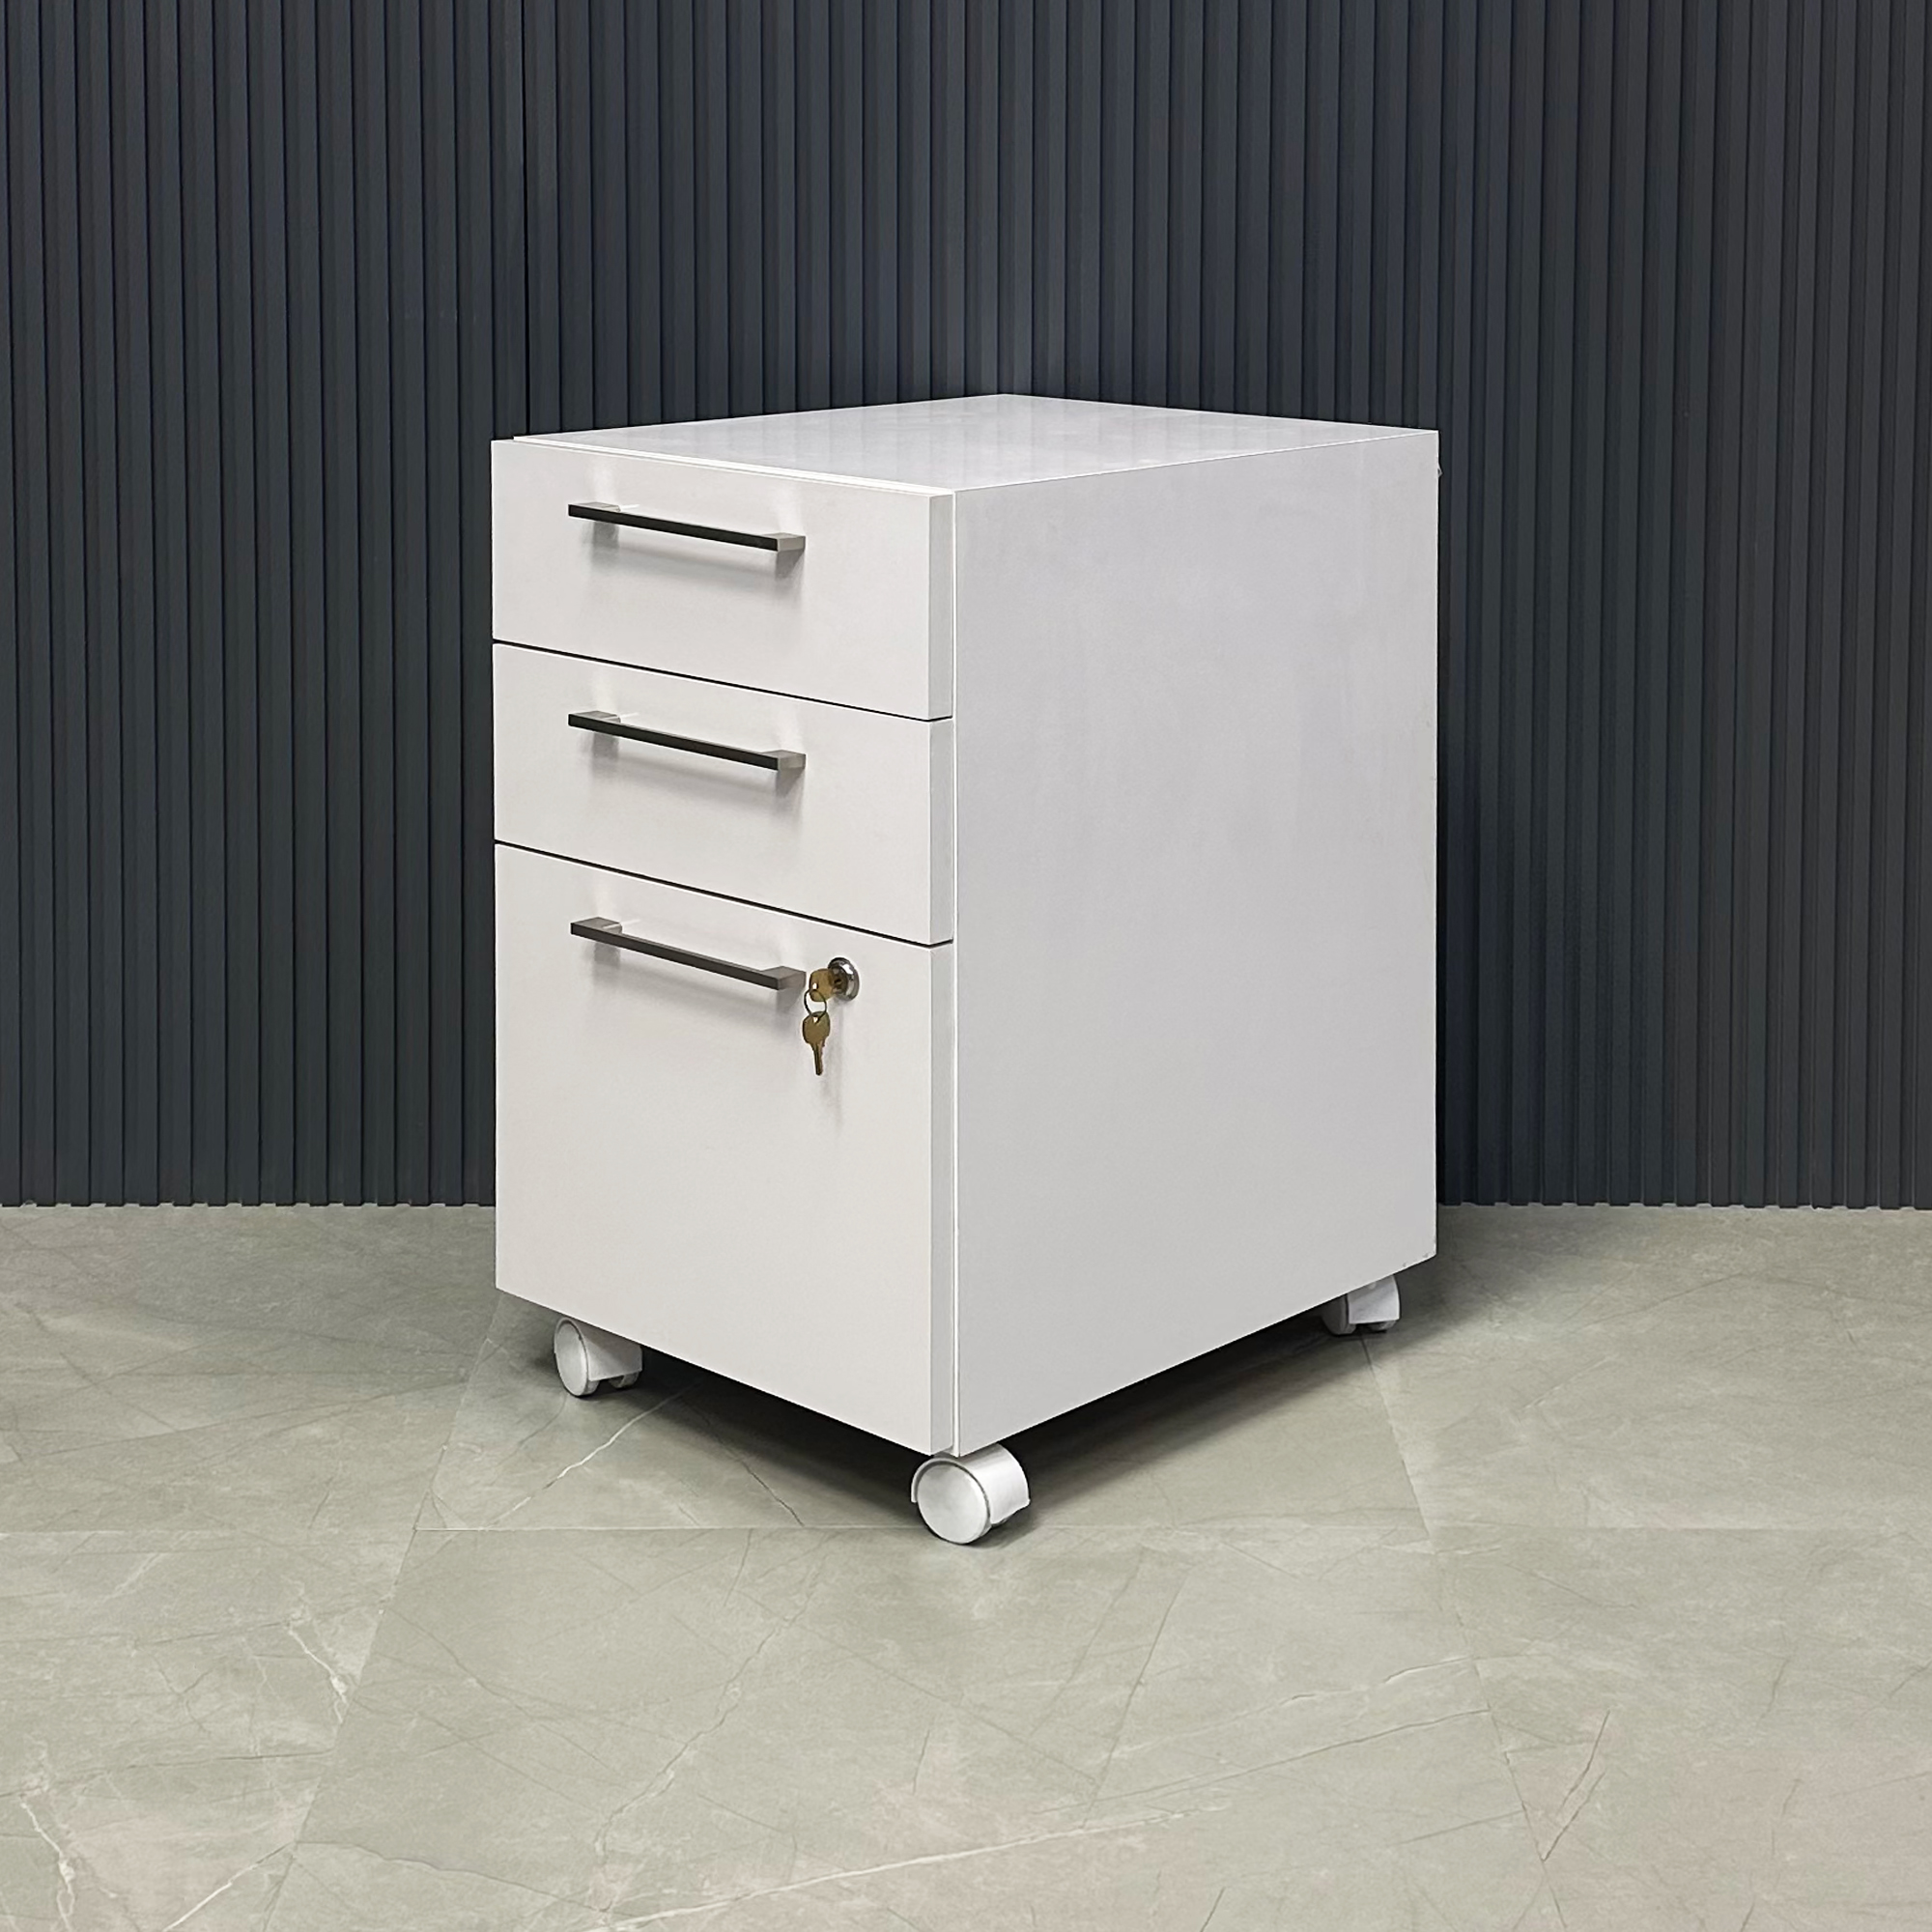 Naples Custom Mobile Storage Cabinet in white gloss laminate and lock on third drawer, shown here.